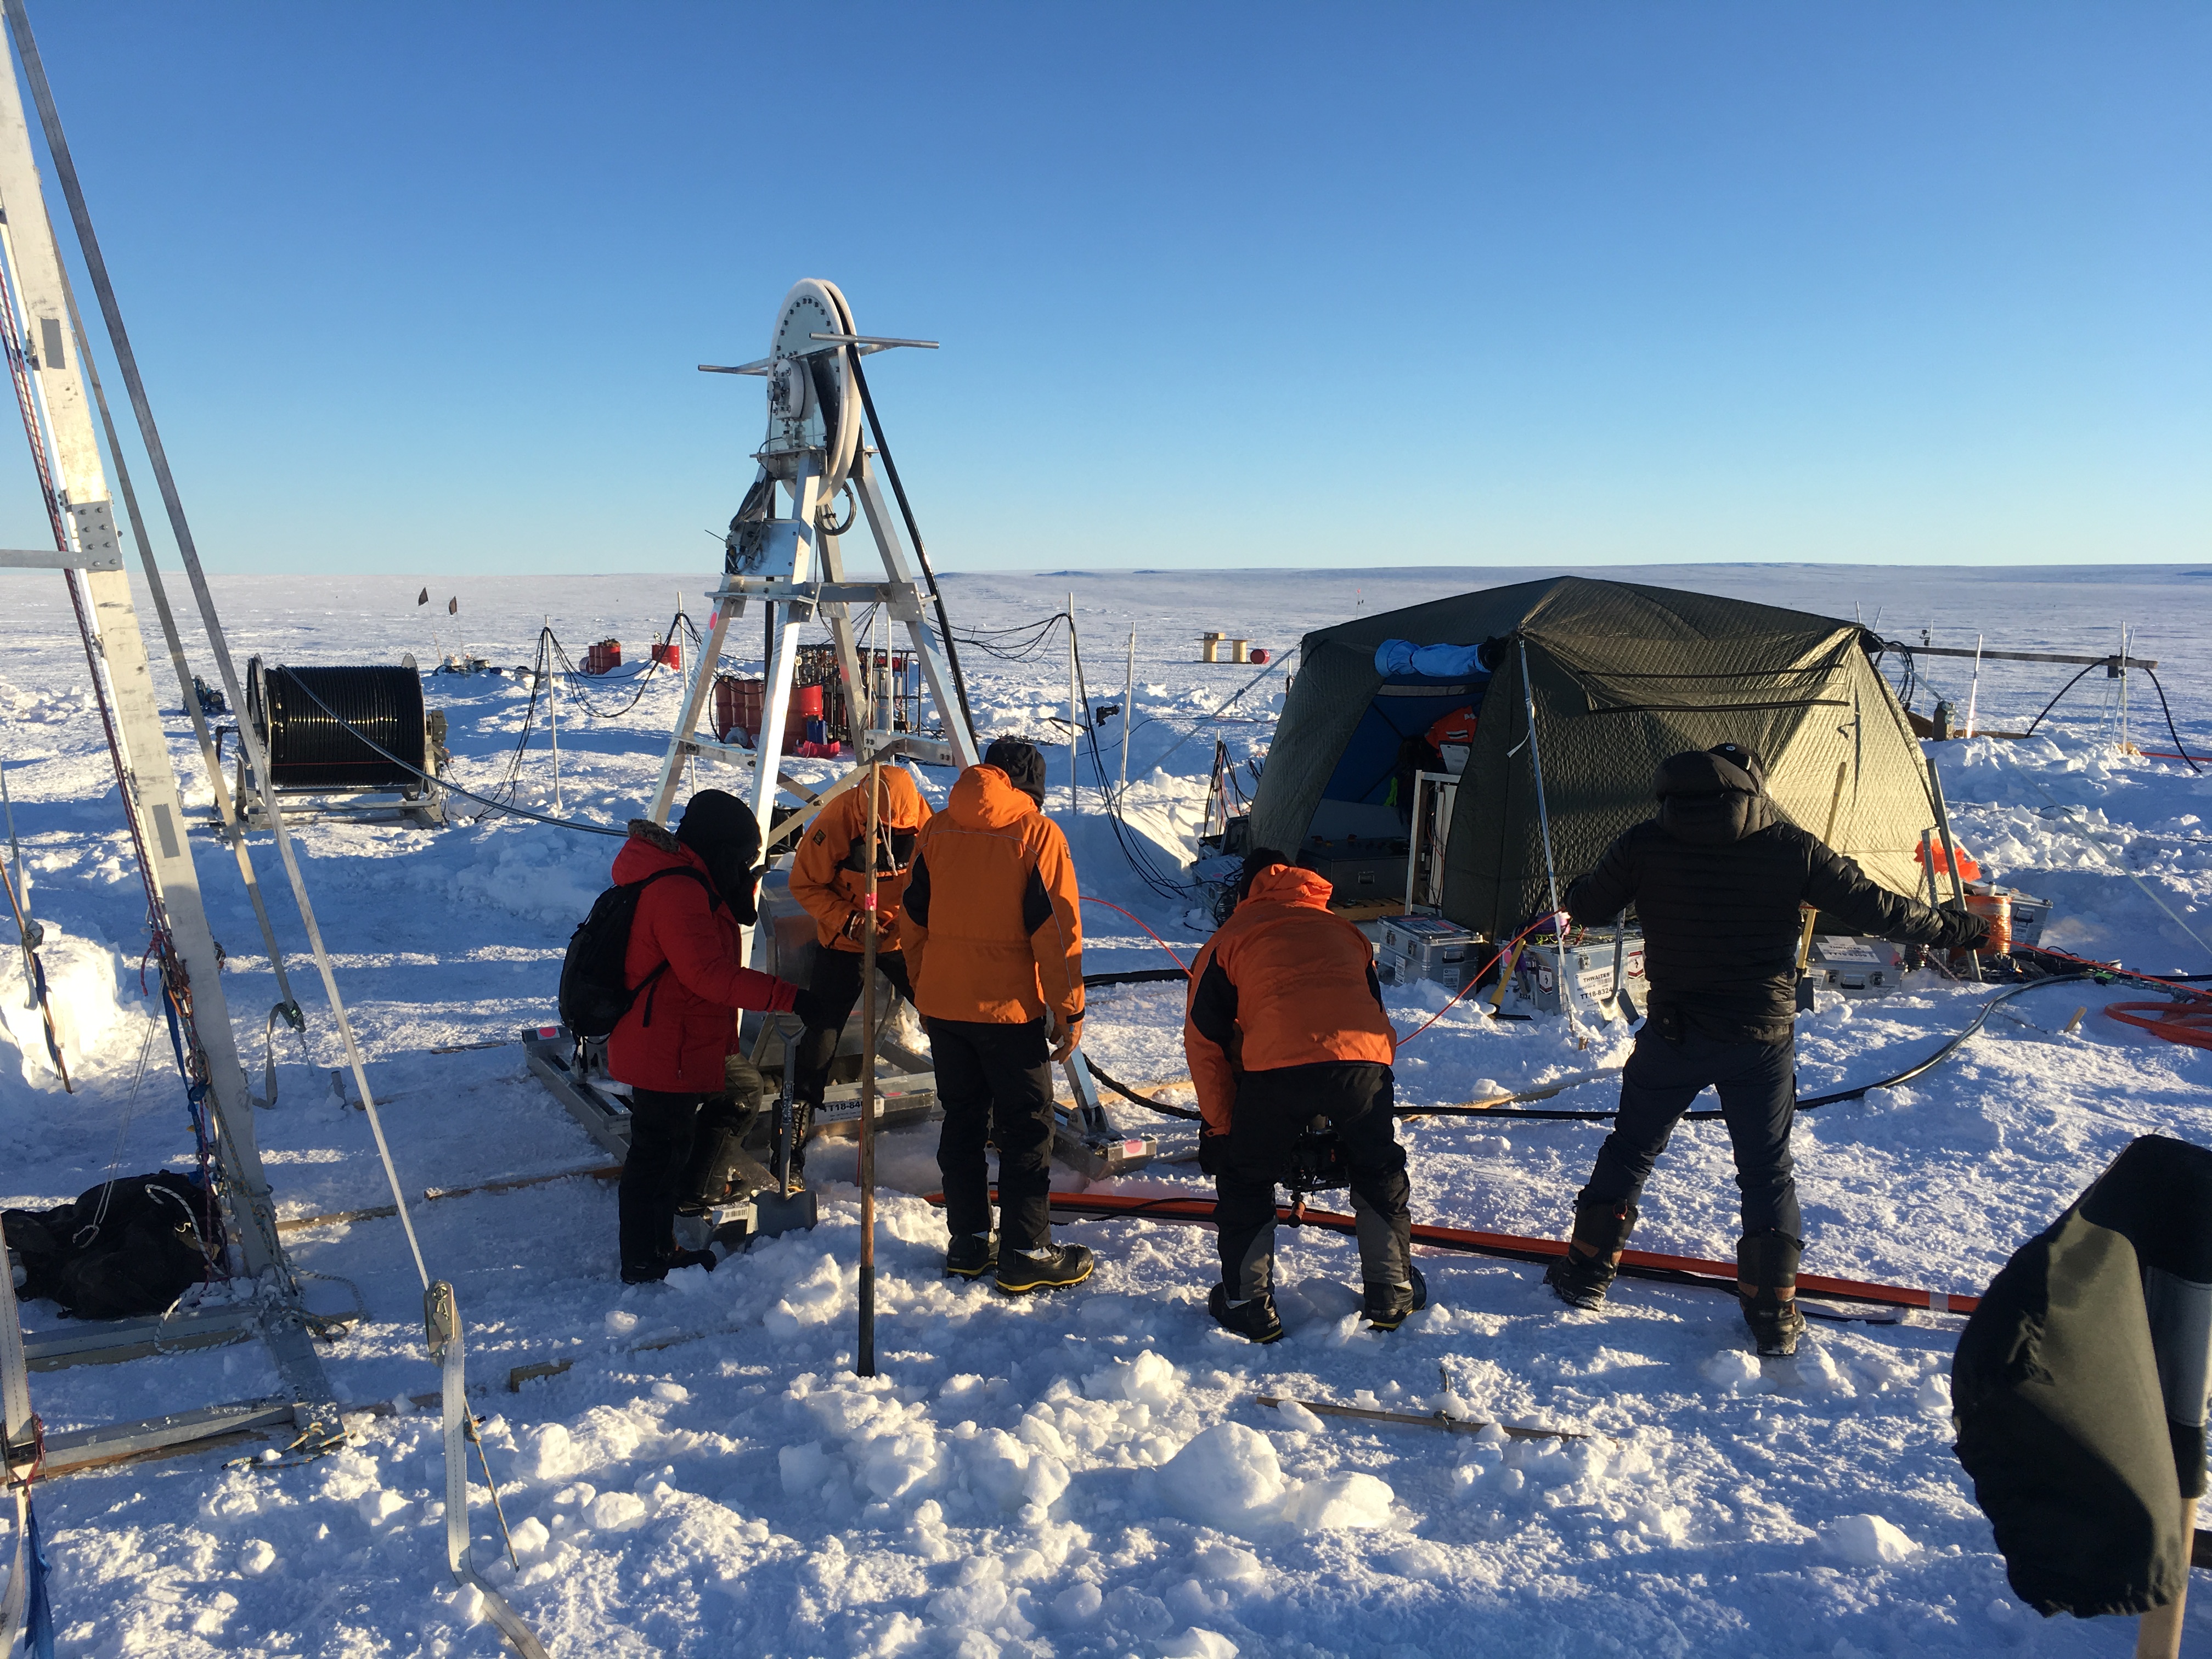 Team deploying the hot water drill at Thwaites Glacier